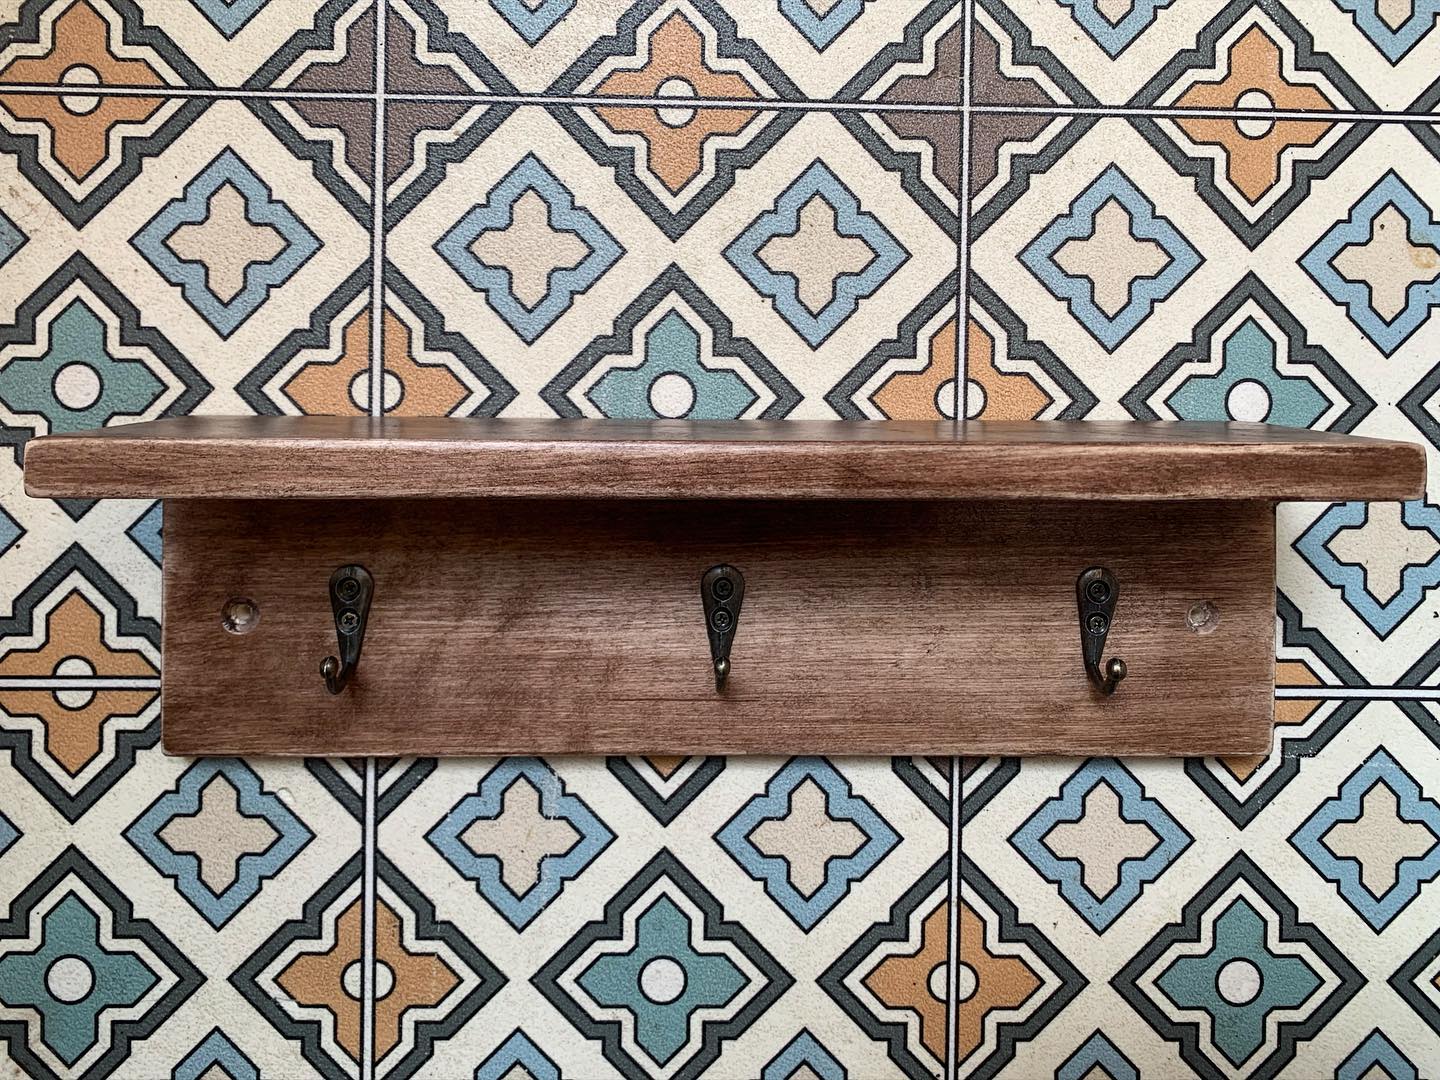 We have made some more of these little shelf hooks! And have 1 remaining, £12 including shipping. If Anyone would like it, let us know. We are also working on some oak, peg hook versions without a shelf which we hope will be available at upcoming markets. Next date booked is the @thecraftandflea on the 25th of this month at Paintworks in Bristol 🥳 PRODUCT INFO-W30cm x H9cm x Shelf Depth 8cm Made from white wood and finished with a walnut varnish and slightly aged effect, this triple hook shelf tidy is ideal for a hallway or small space. Great for essentials such as mask, keys and shopping bag, or perfect for jewellery and small accessories.Hooks are h3cm x 2.5cm (internally h0.8x1.5cm)Fix to the wall using the 2 countersunk screw holes (Screws and wall plugs not included, please use suitable fixings to safely install)